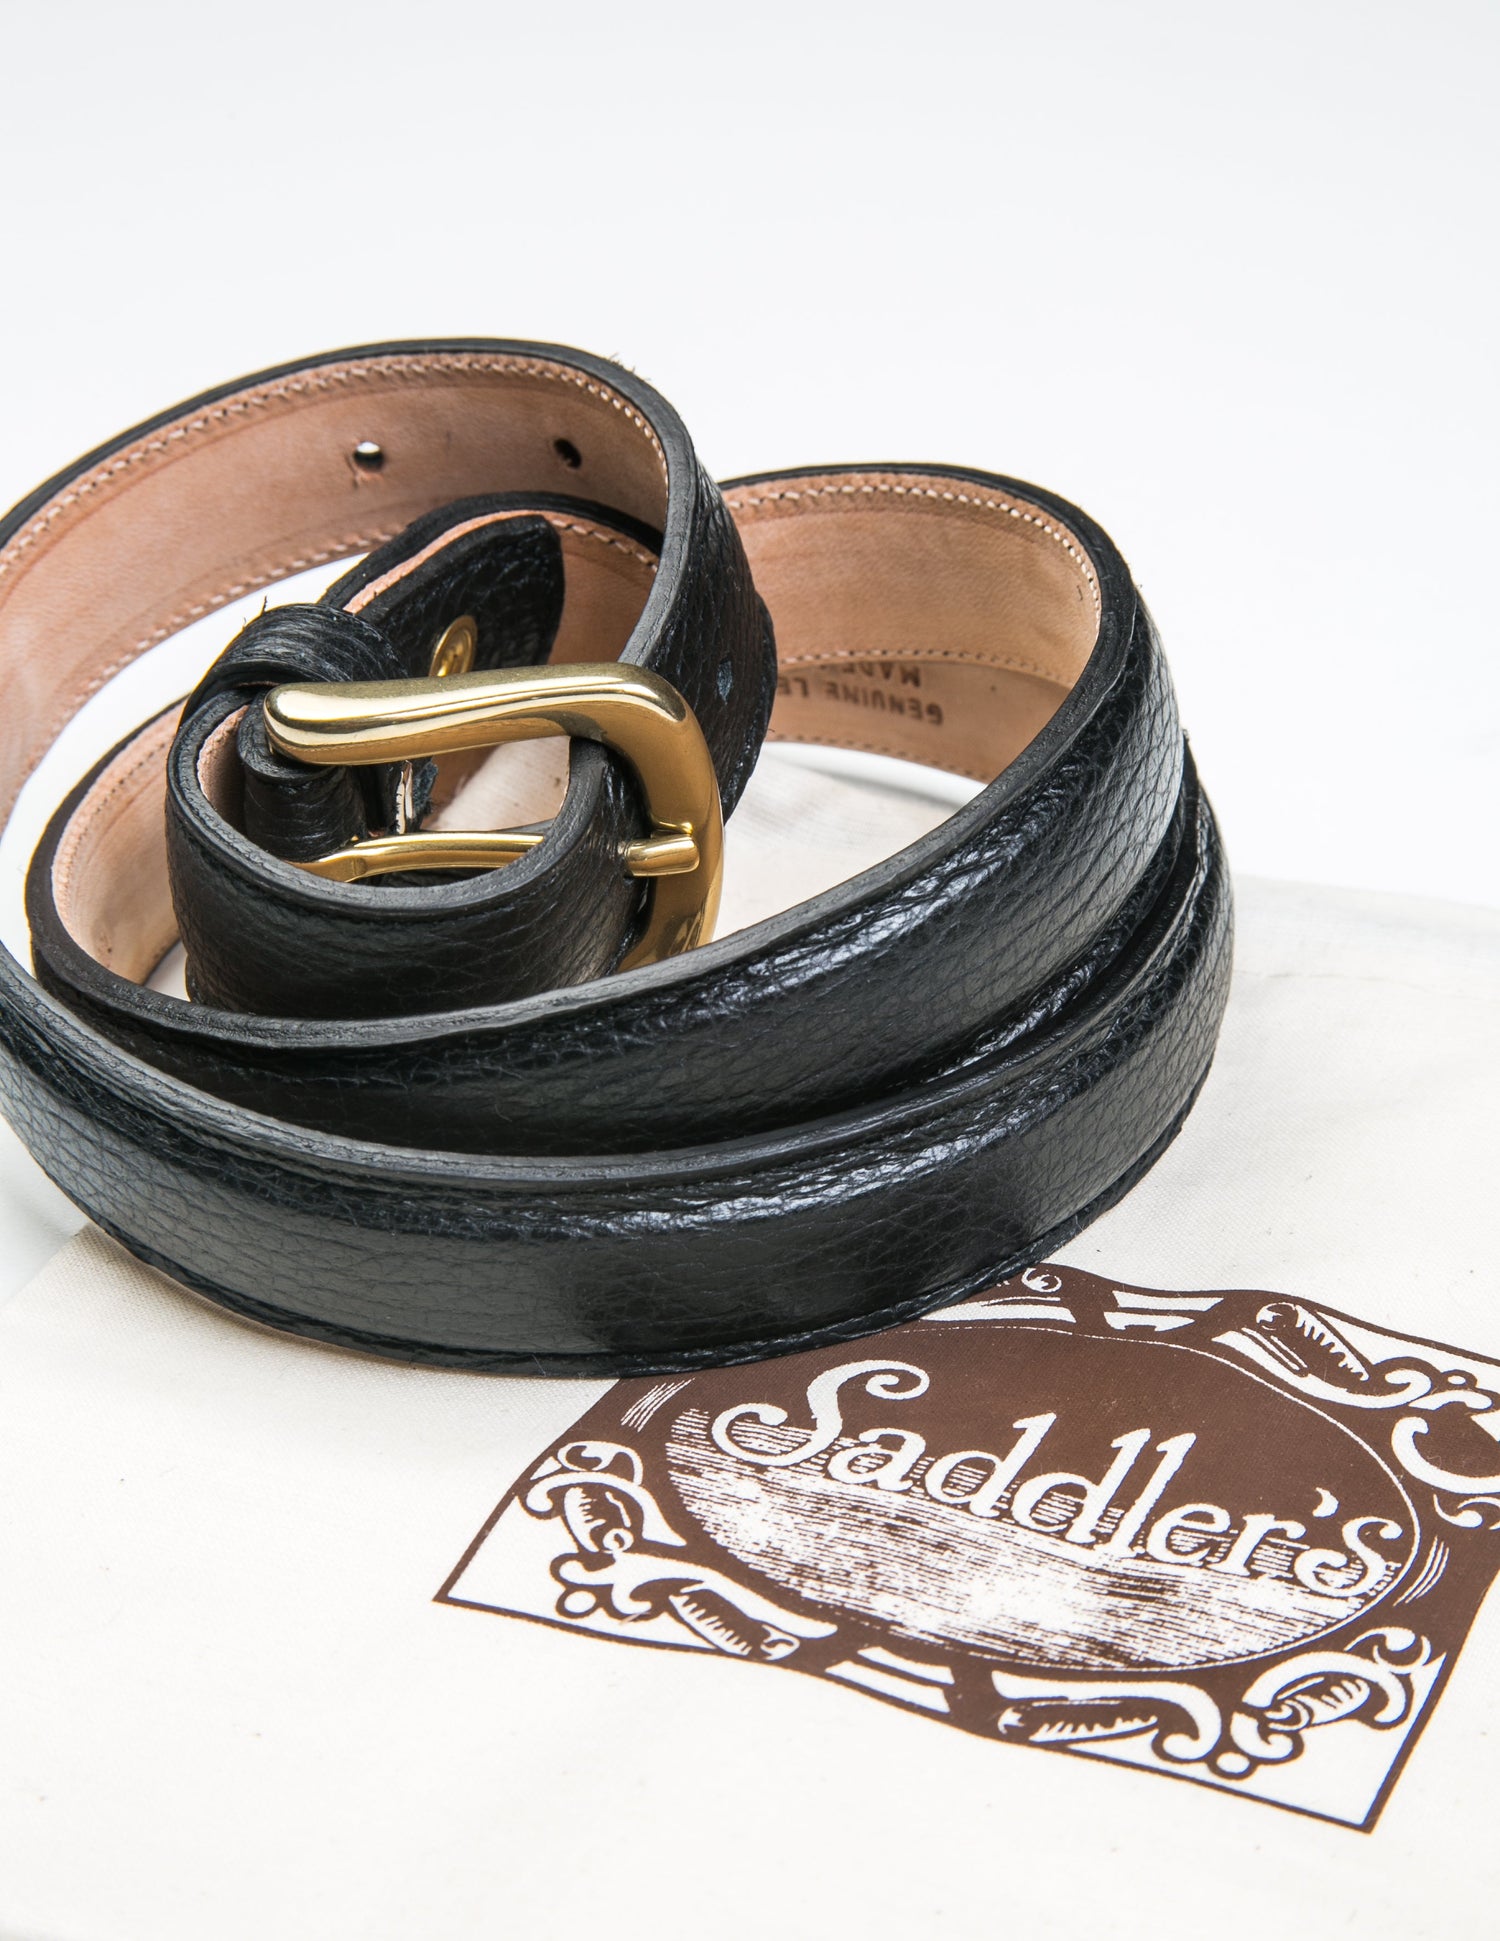 Photo of Brooklyn Tailors x Saddler's 25mm Belt in Grain Leather - Black coiled next to the fabric Saddler's bag that the belt is sold with.